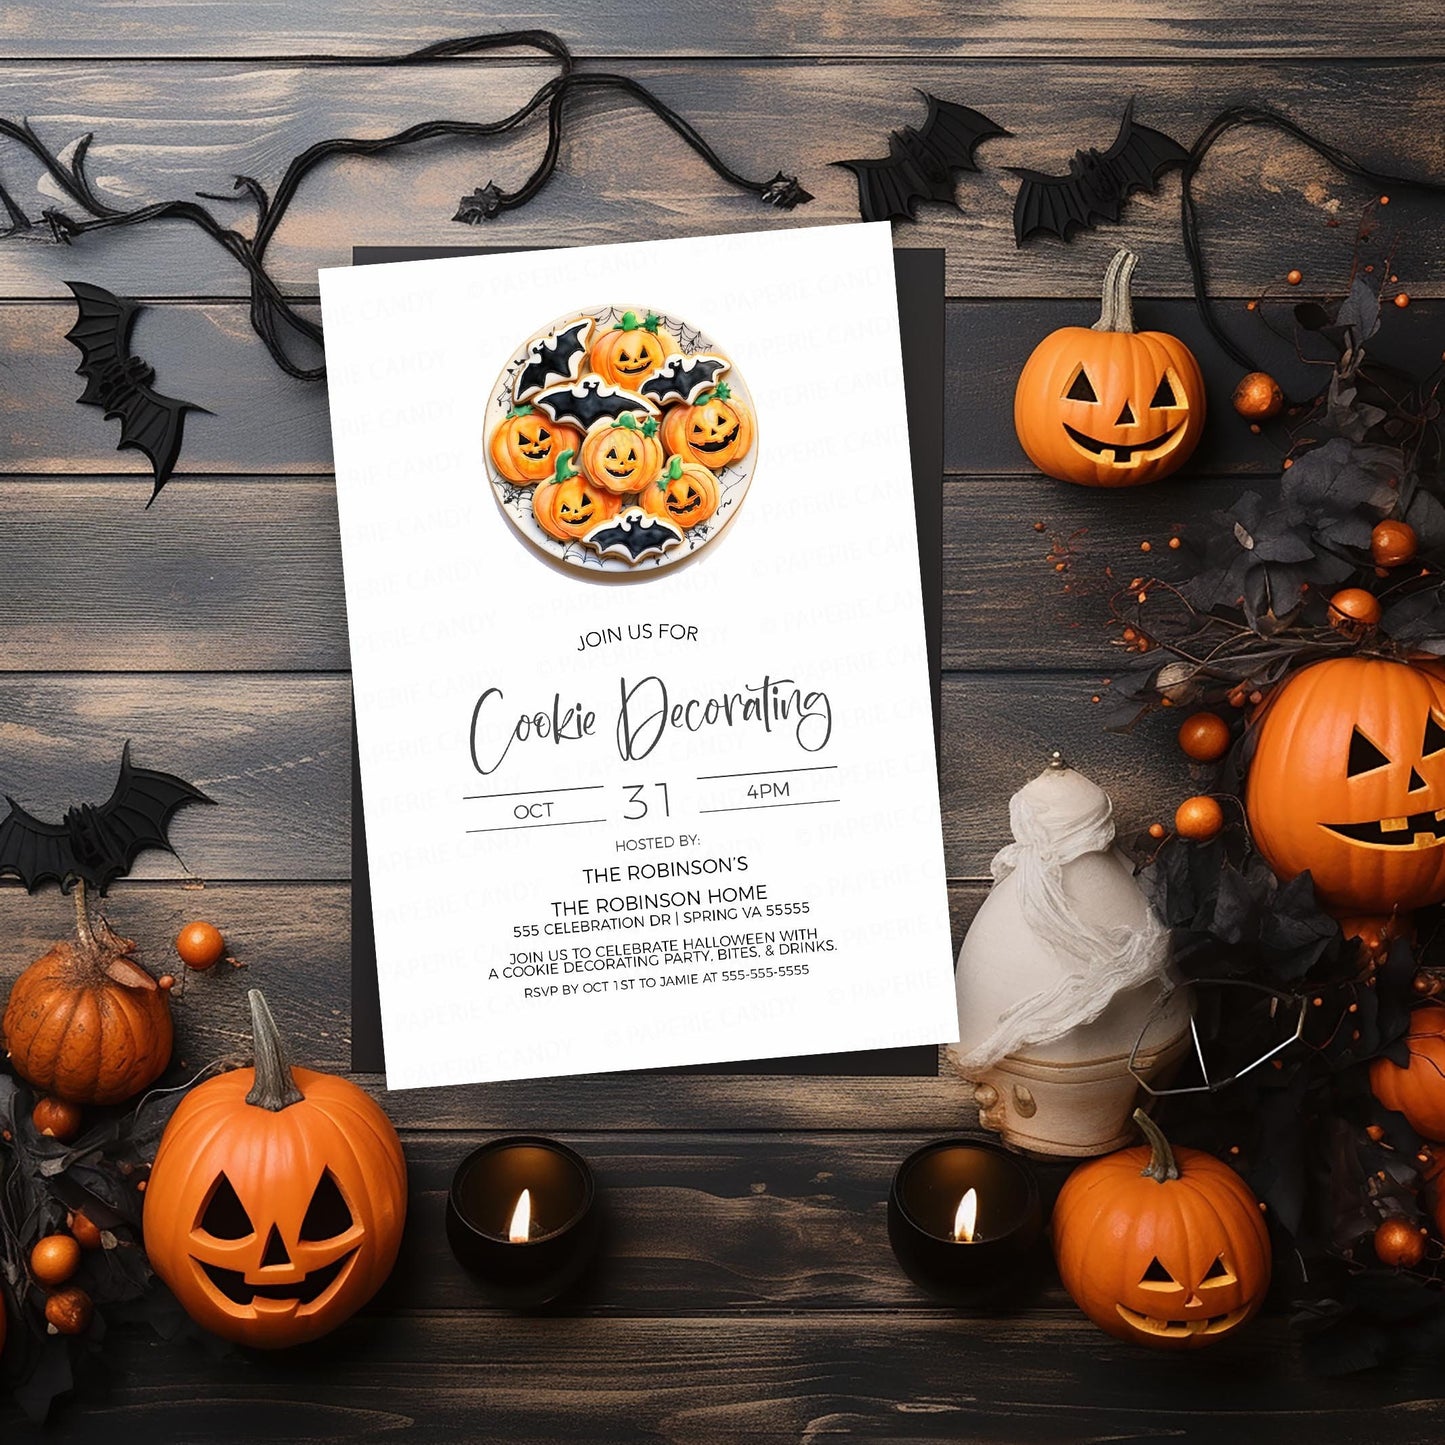 Halloween Cookie Decorating Party Invitation, Cookie Decorating Contest Invite, Kids Birthday Party, Family Fun Event, Editable Printable